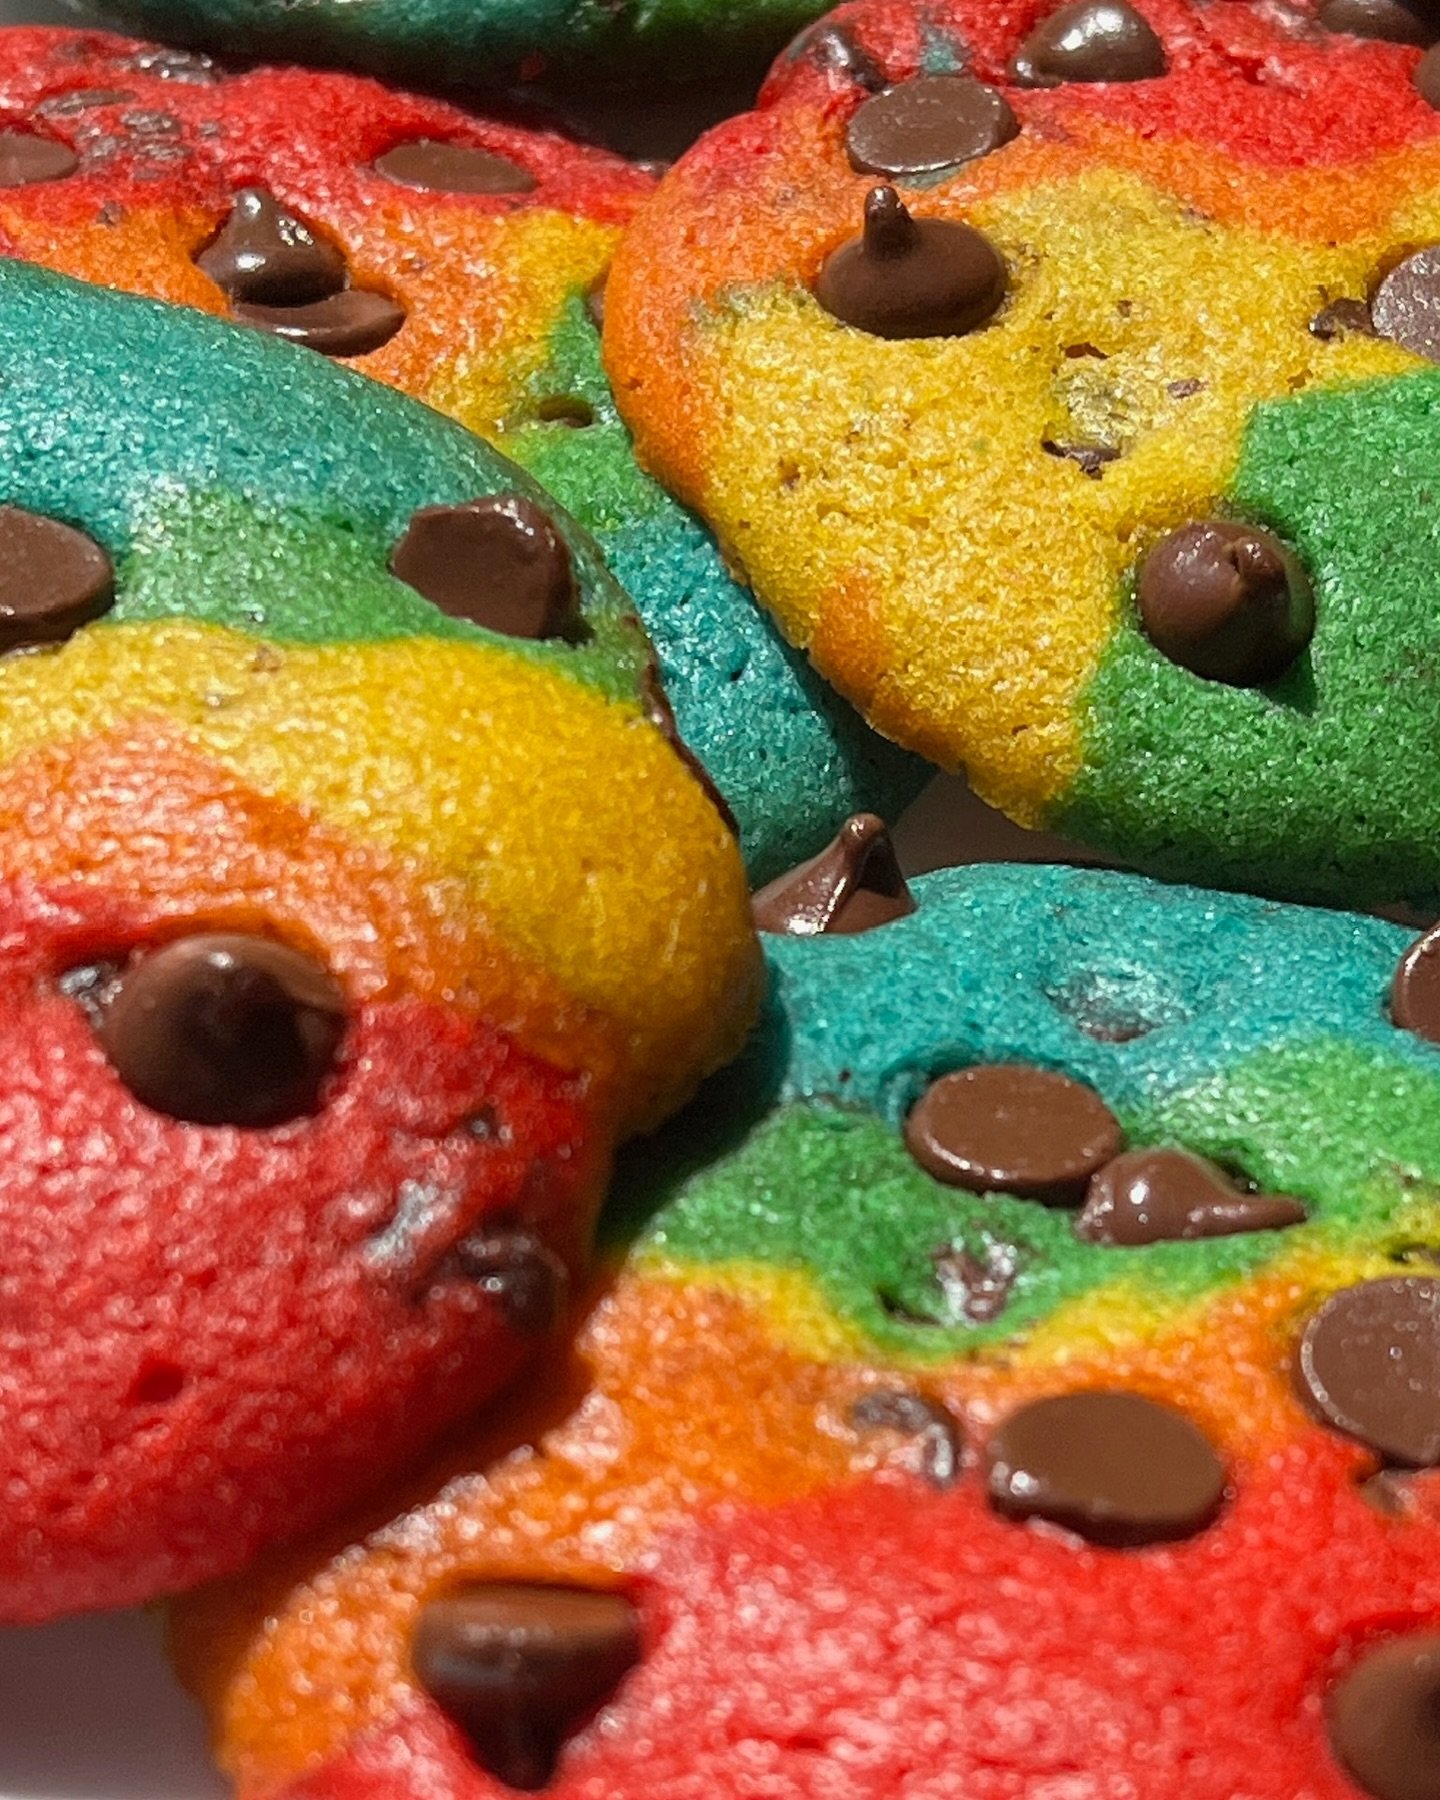 up close and personal📸🤩

our bestselling rainbow chocolate chip cookies sure are easy on the eyes🌈